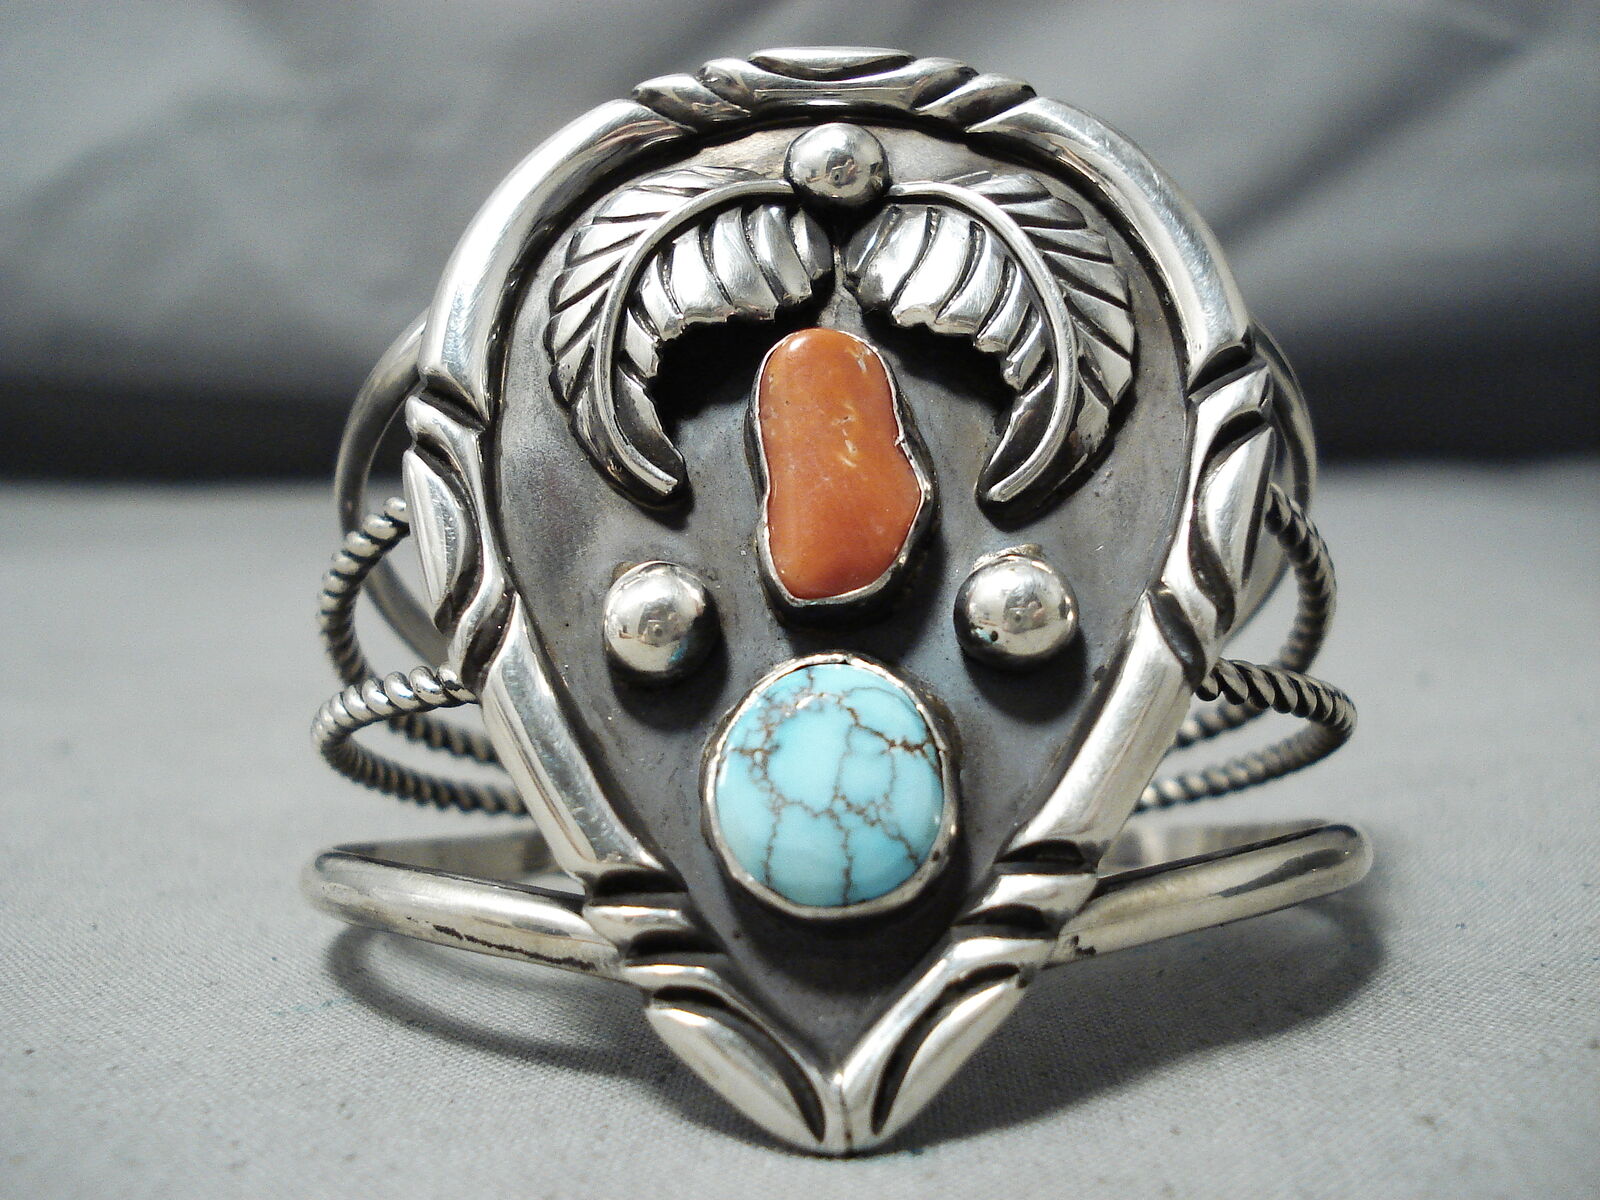 FABULOUS NAVAJO SPIDERWEB TURQUOISE & CORAL STERLING SILVER BRACELET